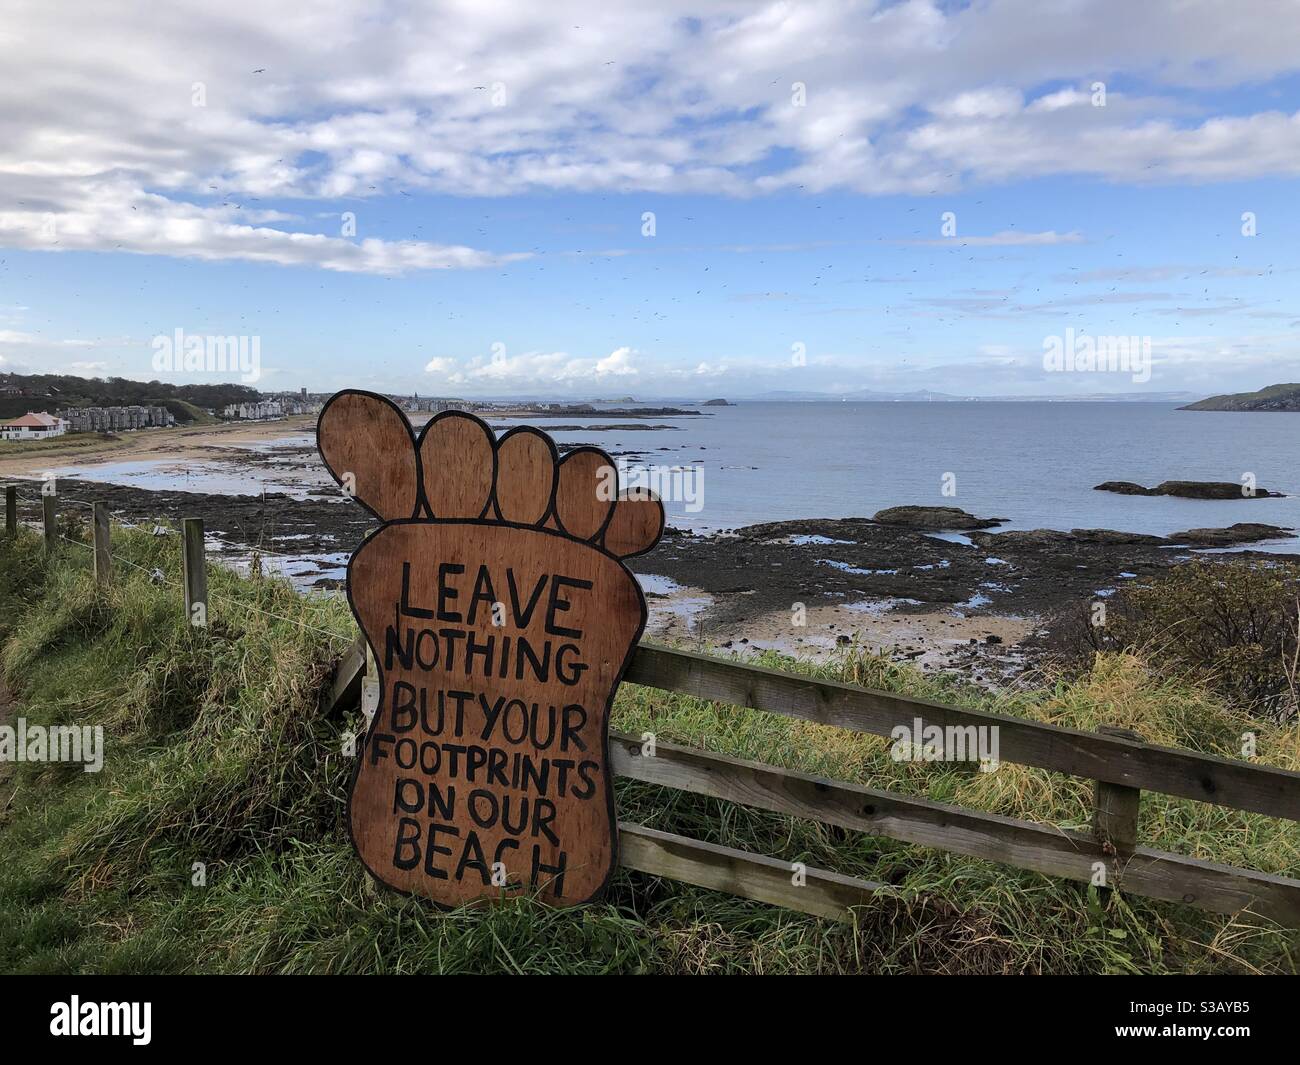 Beach clean - leave only footprints - environmental awareness signage, North Berwick, Scotland Stock Photo